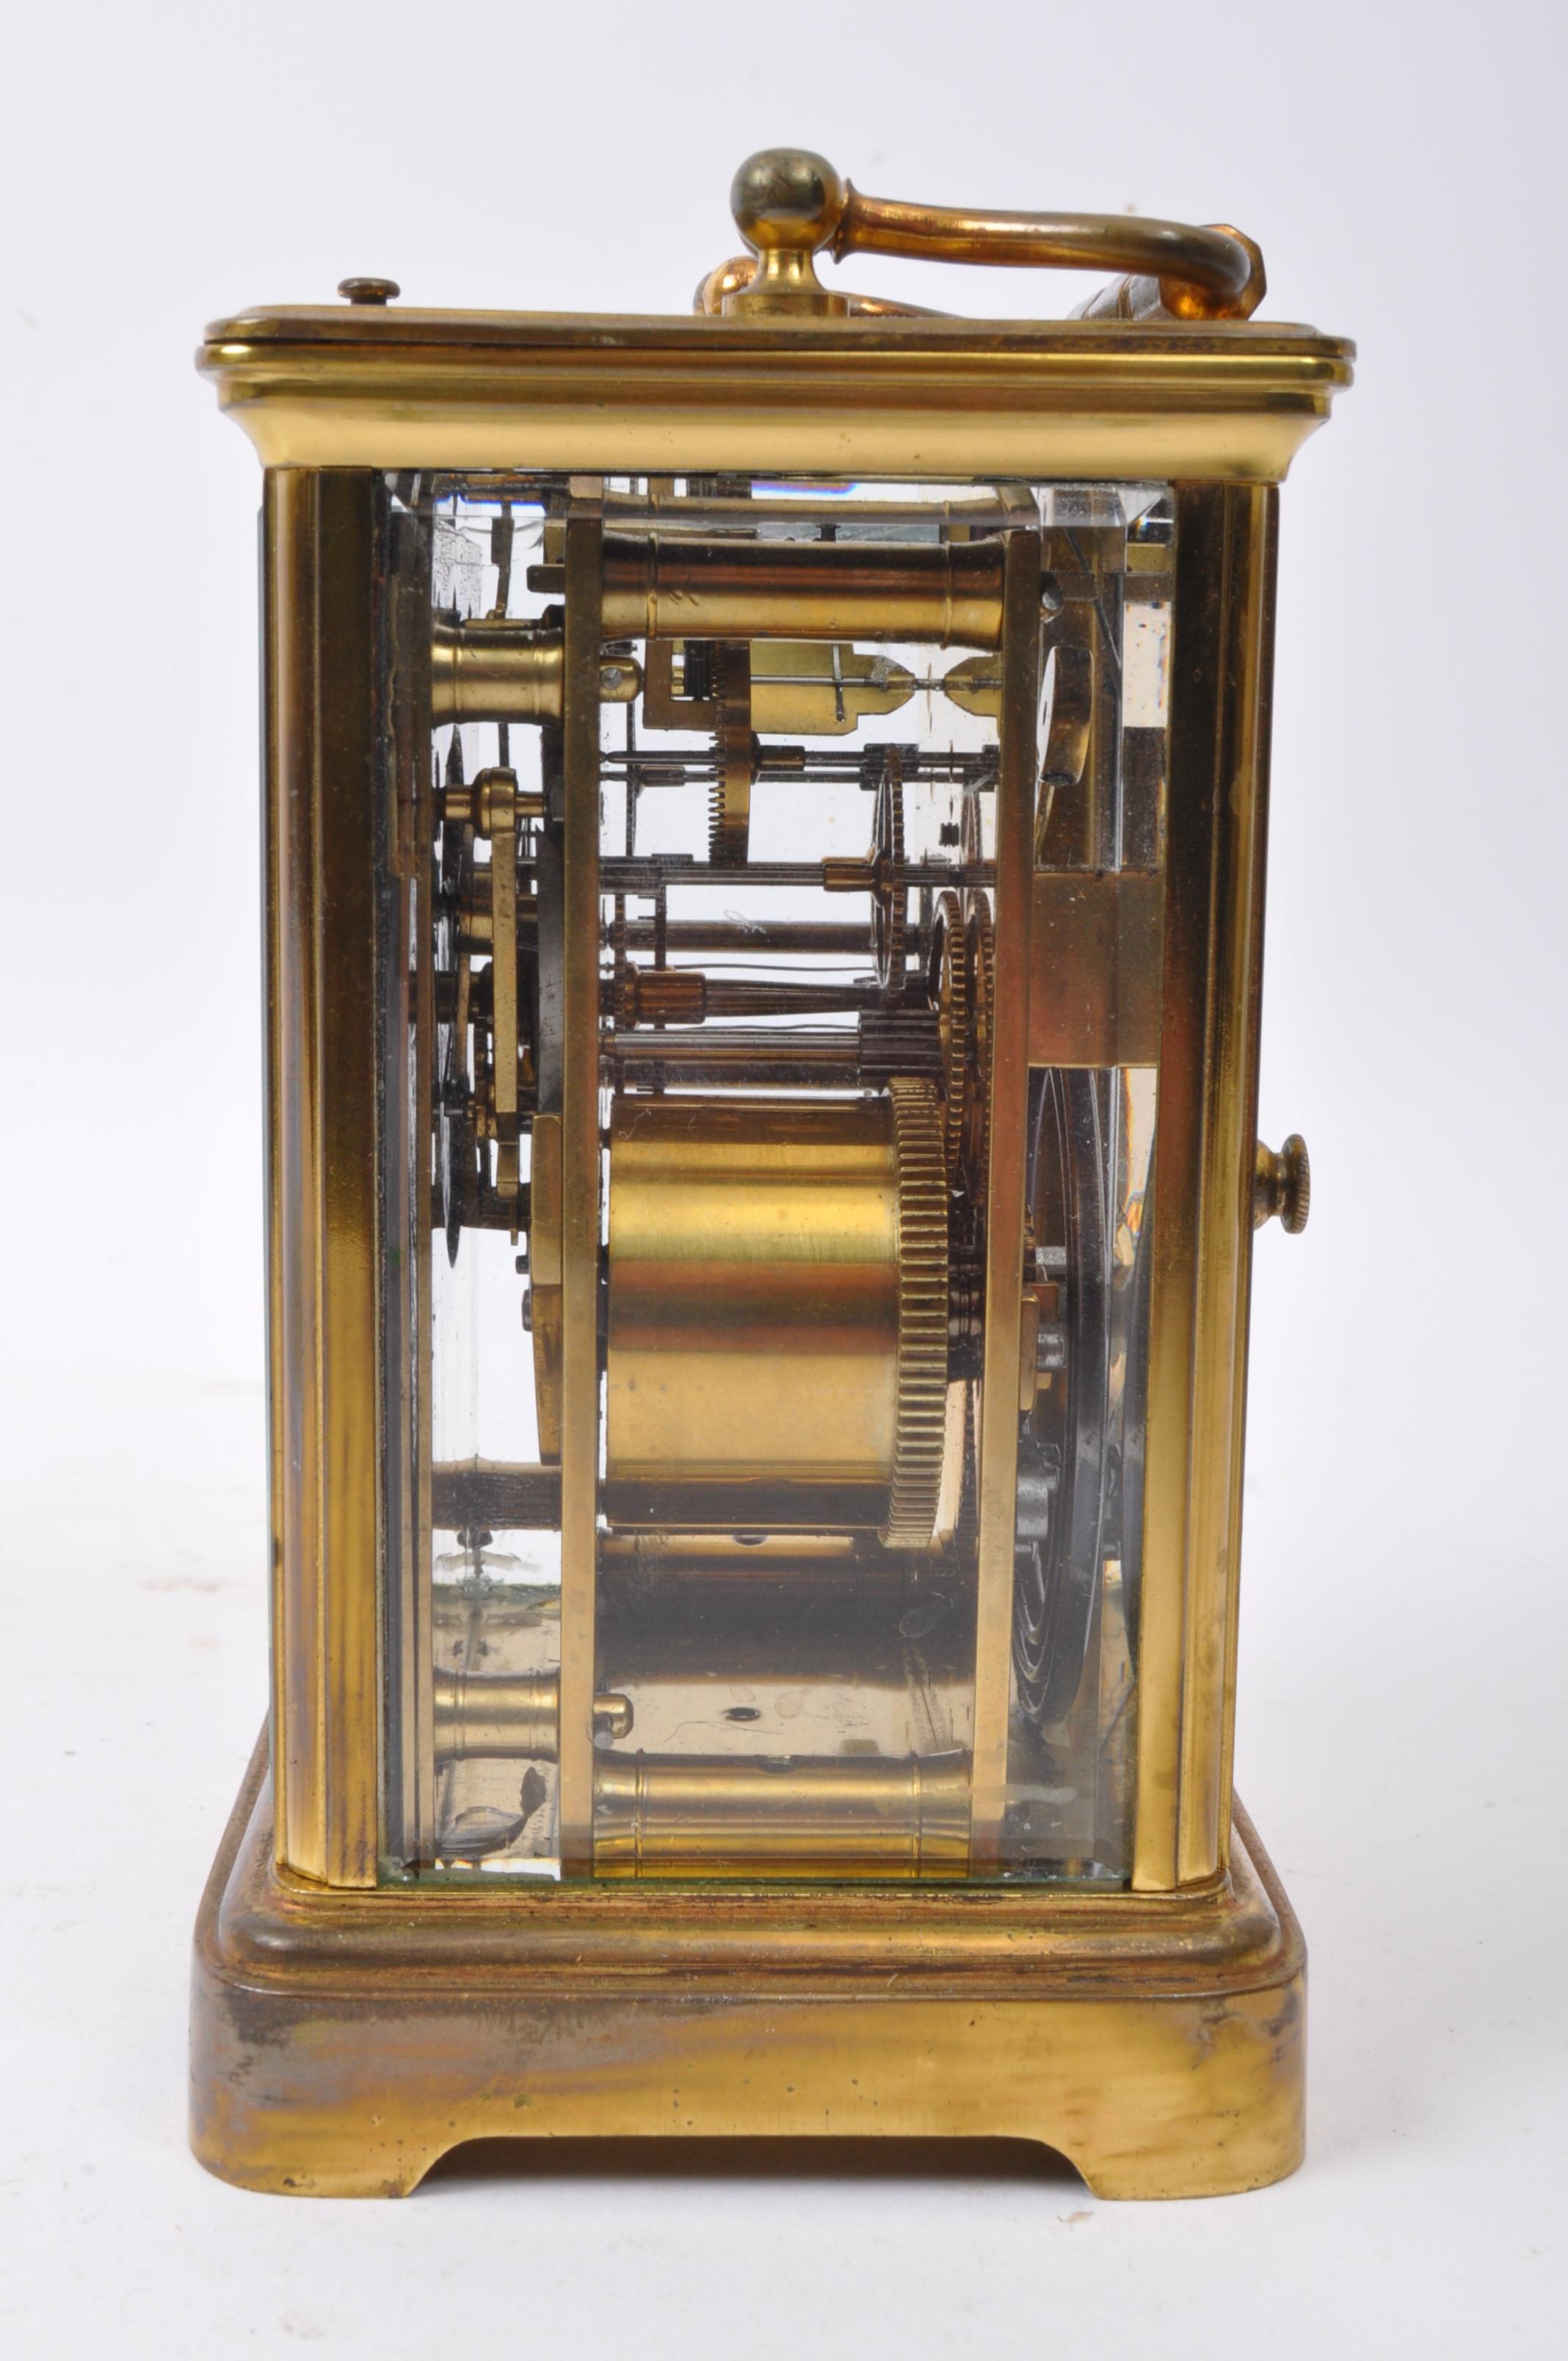 EARLY 20TH CENTURY BRASS CARRIAGE CLOCK - Image 3 of 5